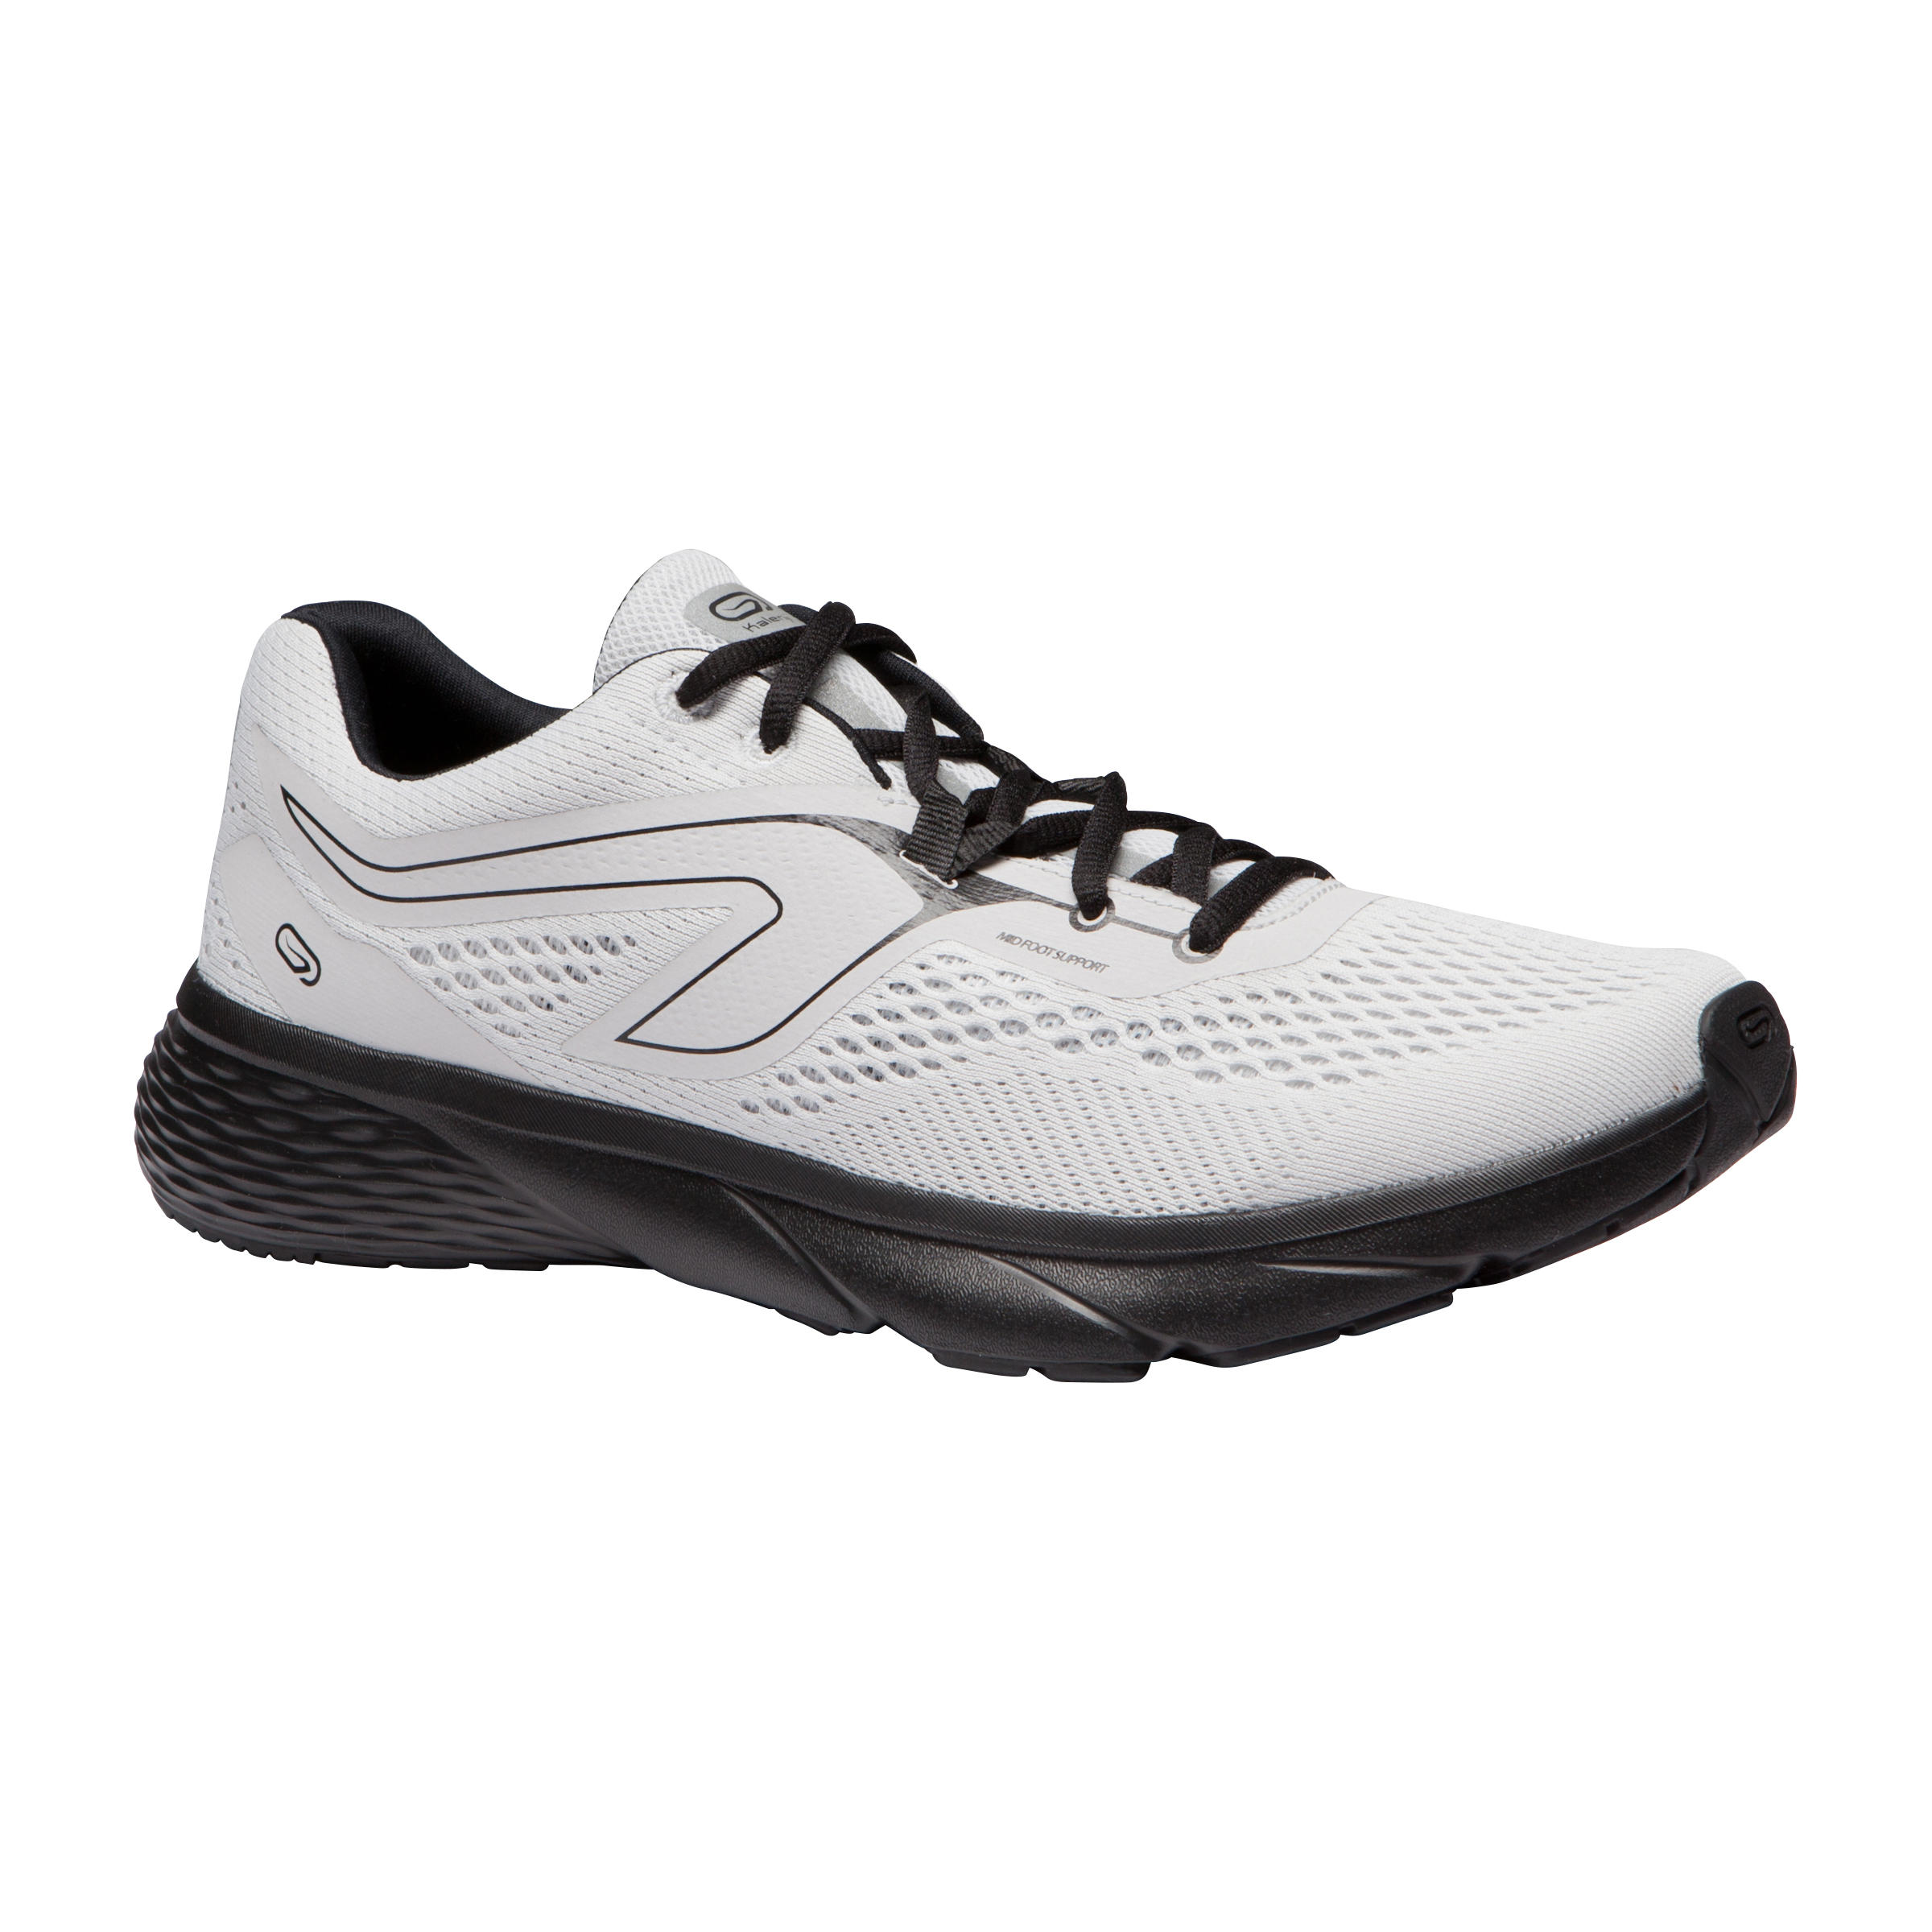 sports shoes at decathlon